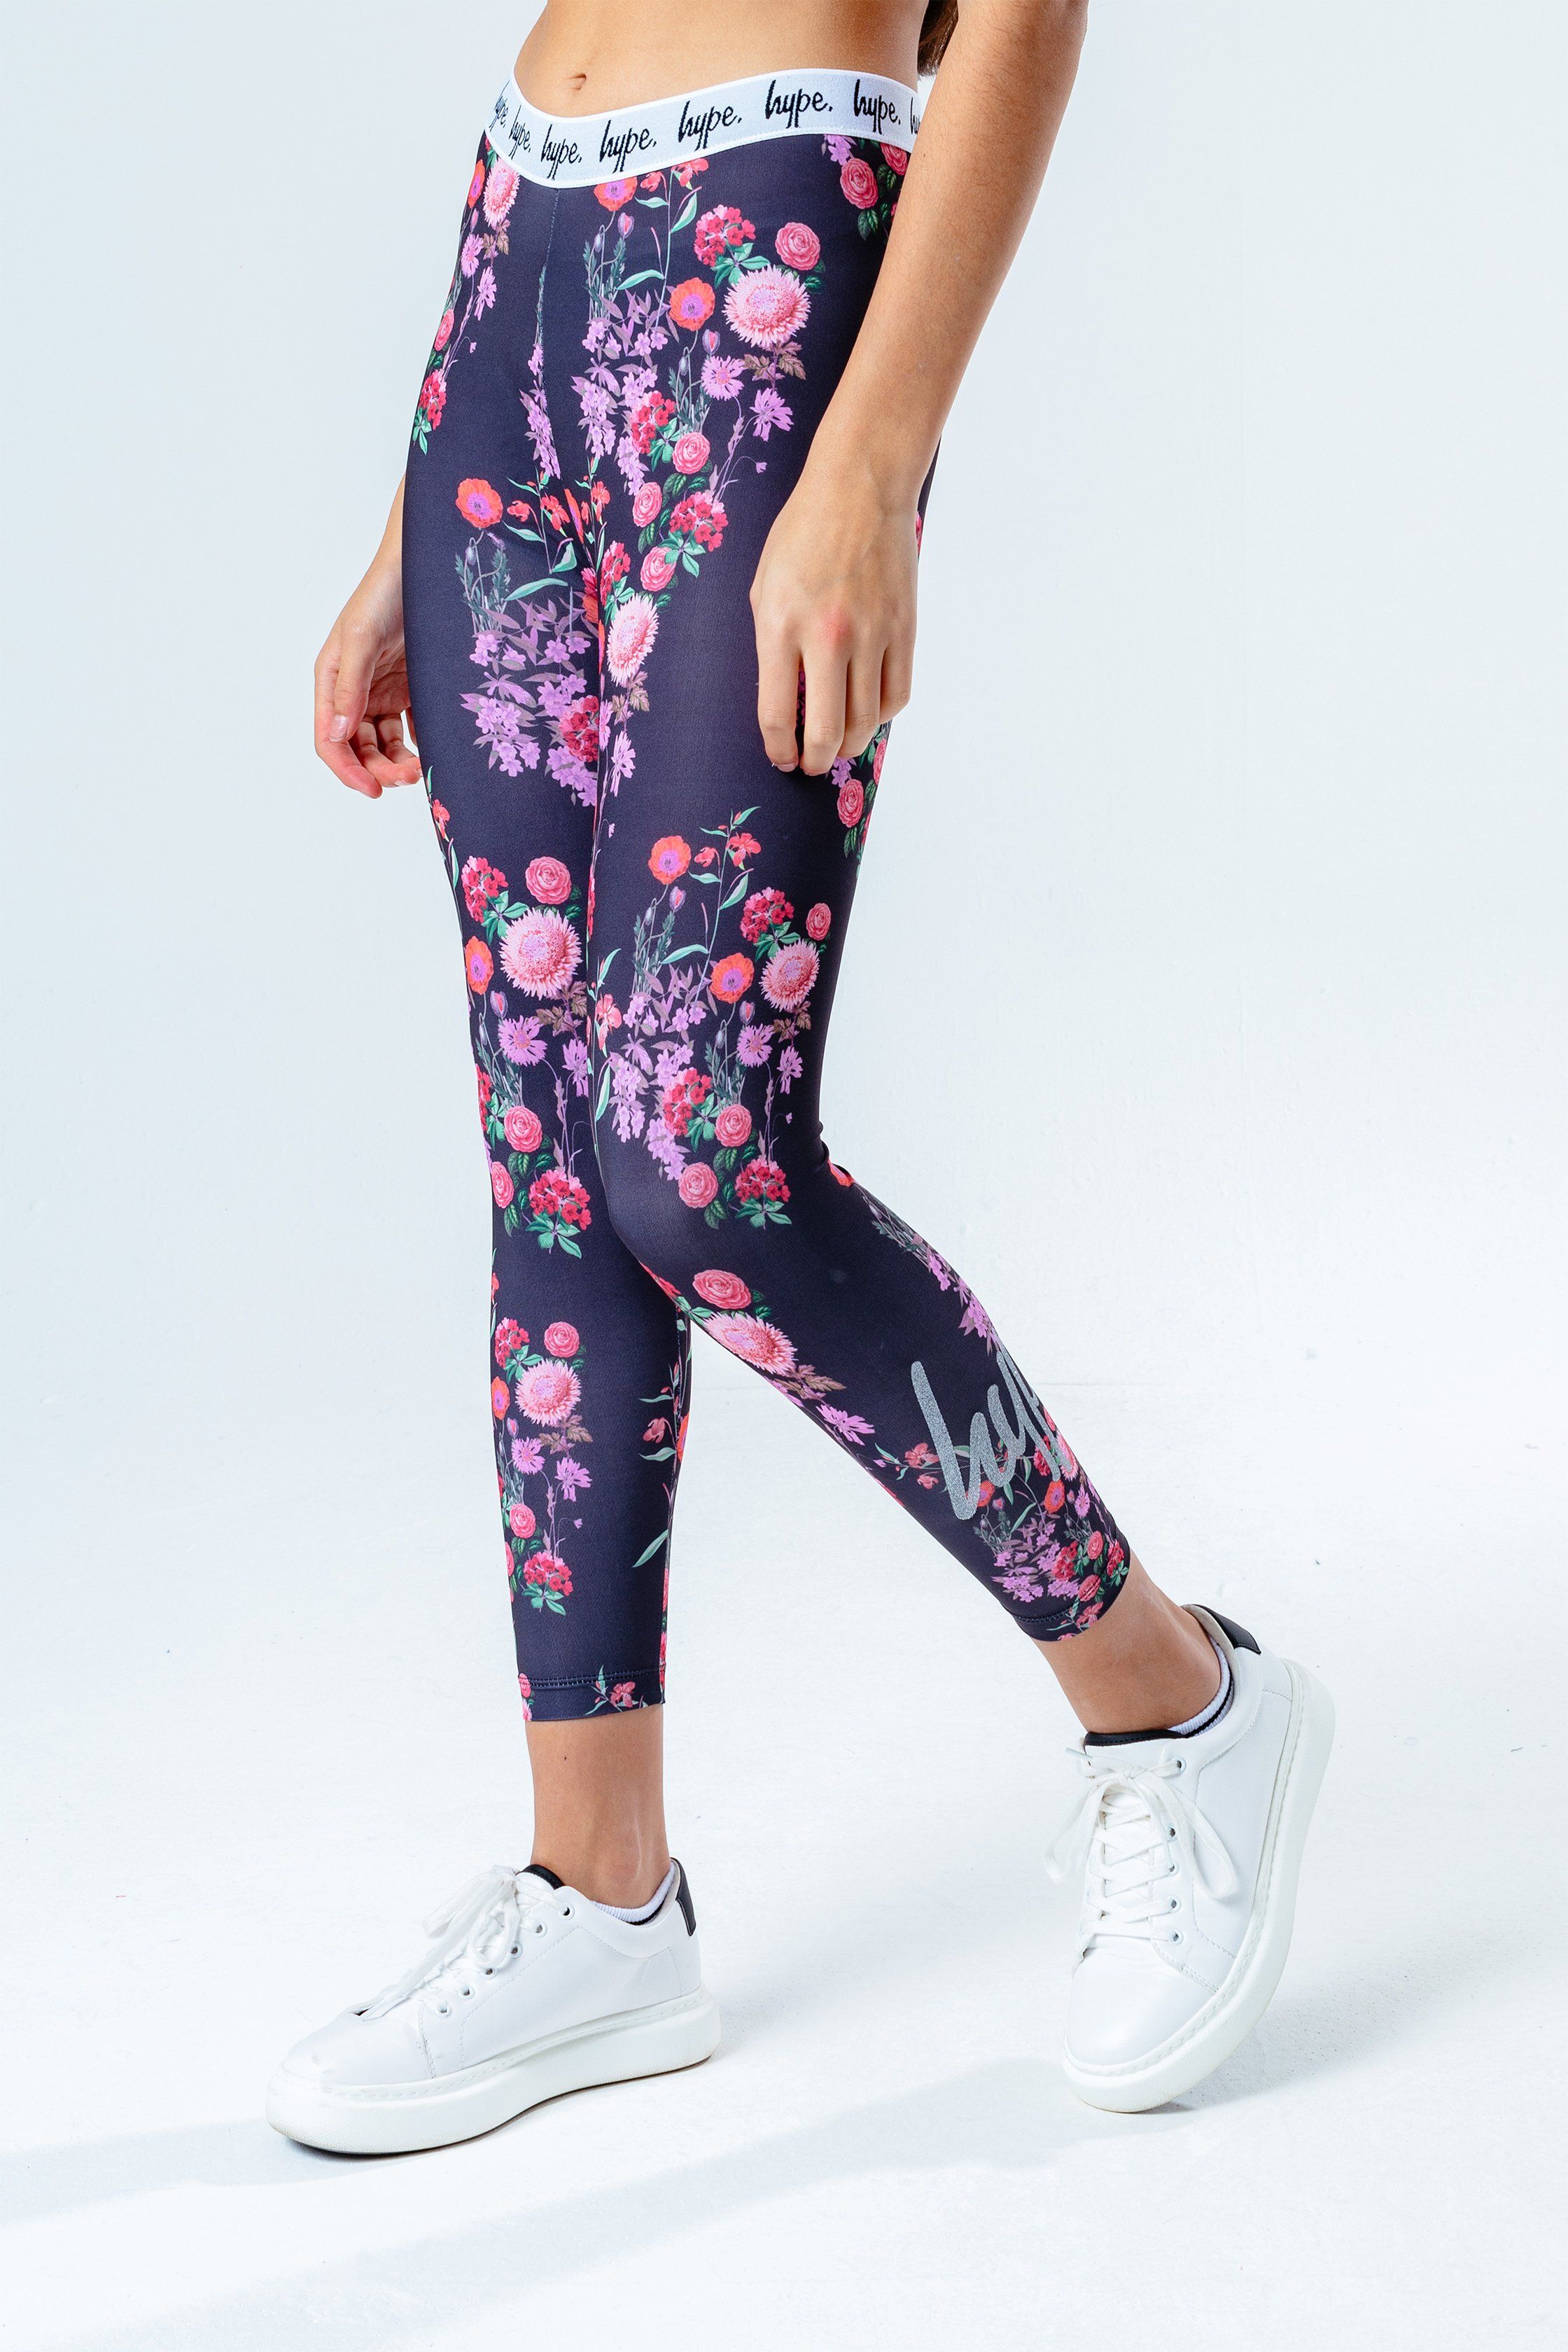 The HYPE. Ditsy Floral Kids Leggings are perfect to add to your everyday rotation. In a pink, peach, green and black colour palette in our standard kids legging shape. With an embossed monochrome elasticated waistband in a micro poly fabric for the ultimate comfort. Boasting an all-over floral print. Finished with the iconic HYPE. script logo in a  glitter transfer. Wear the matching kids crop tee to complete the look. Machine wash at 30 degrees.